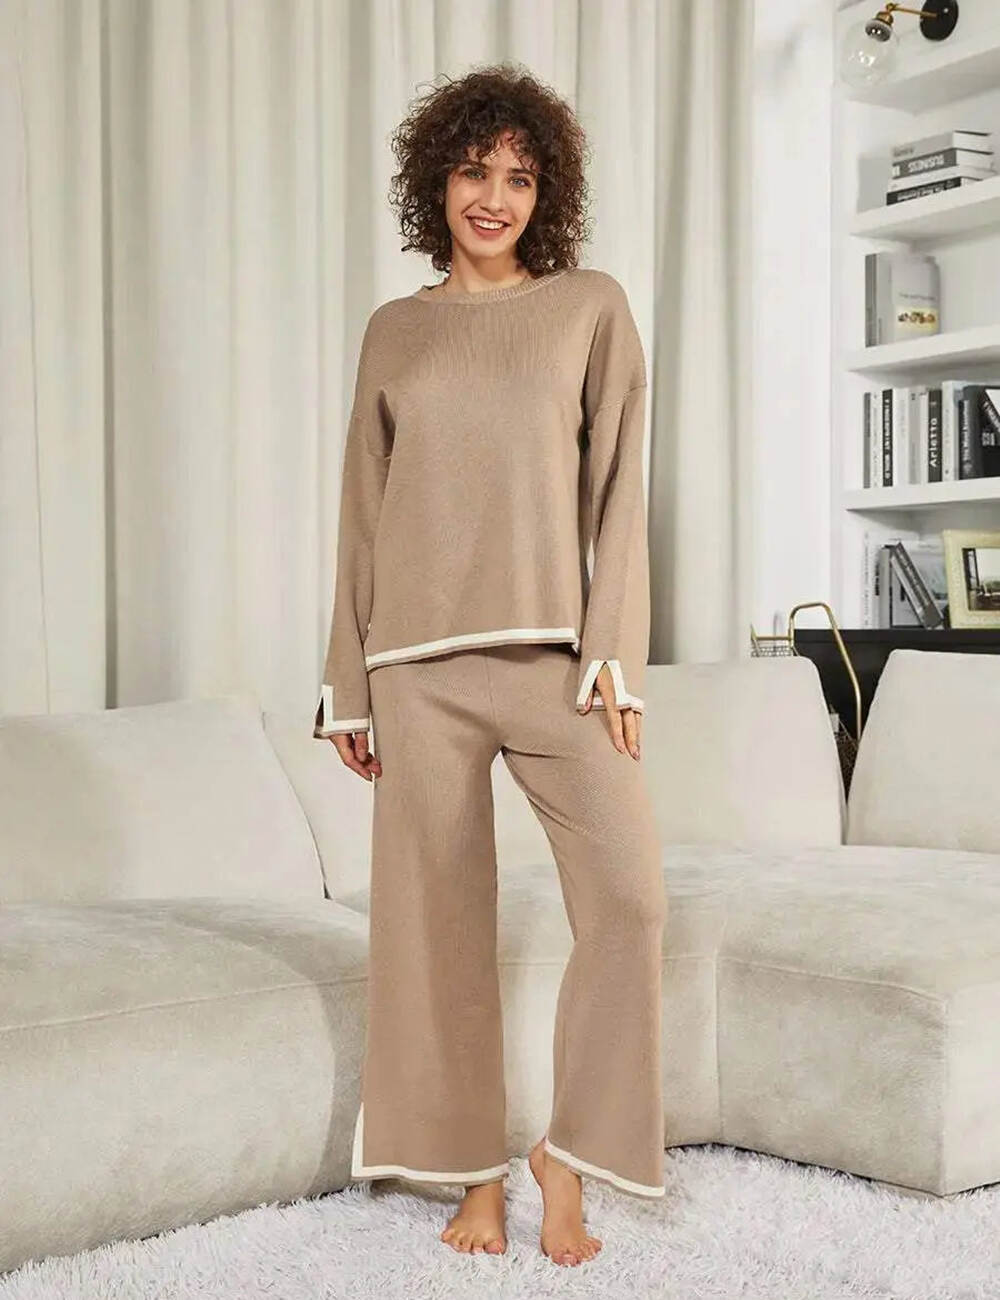 Hot Sale 50% Off- Classy Elastic Knit Lounge Set (Buy 2 Free Shipping)